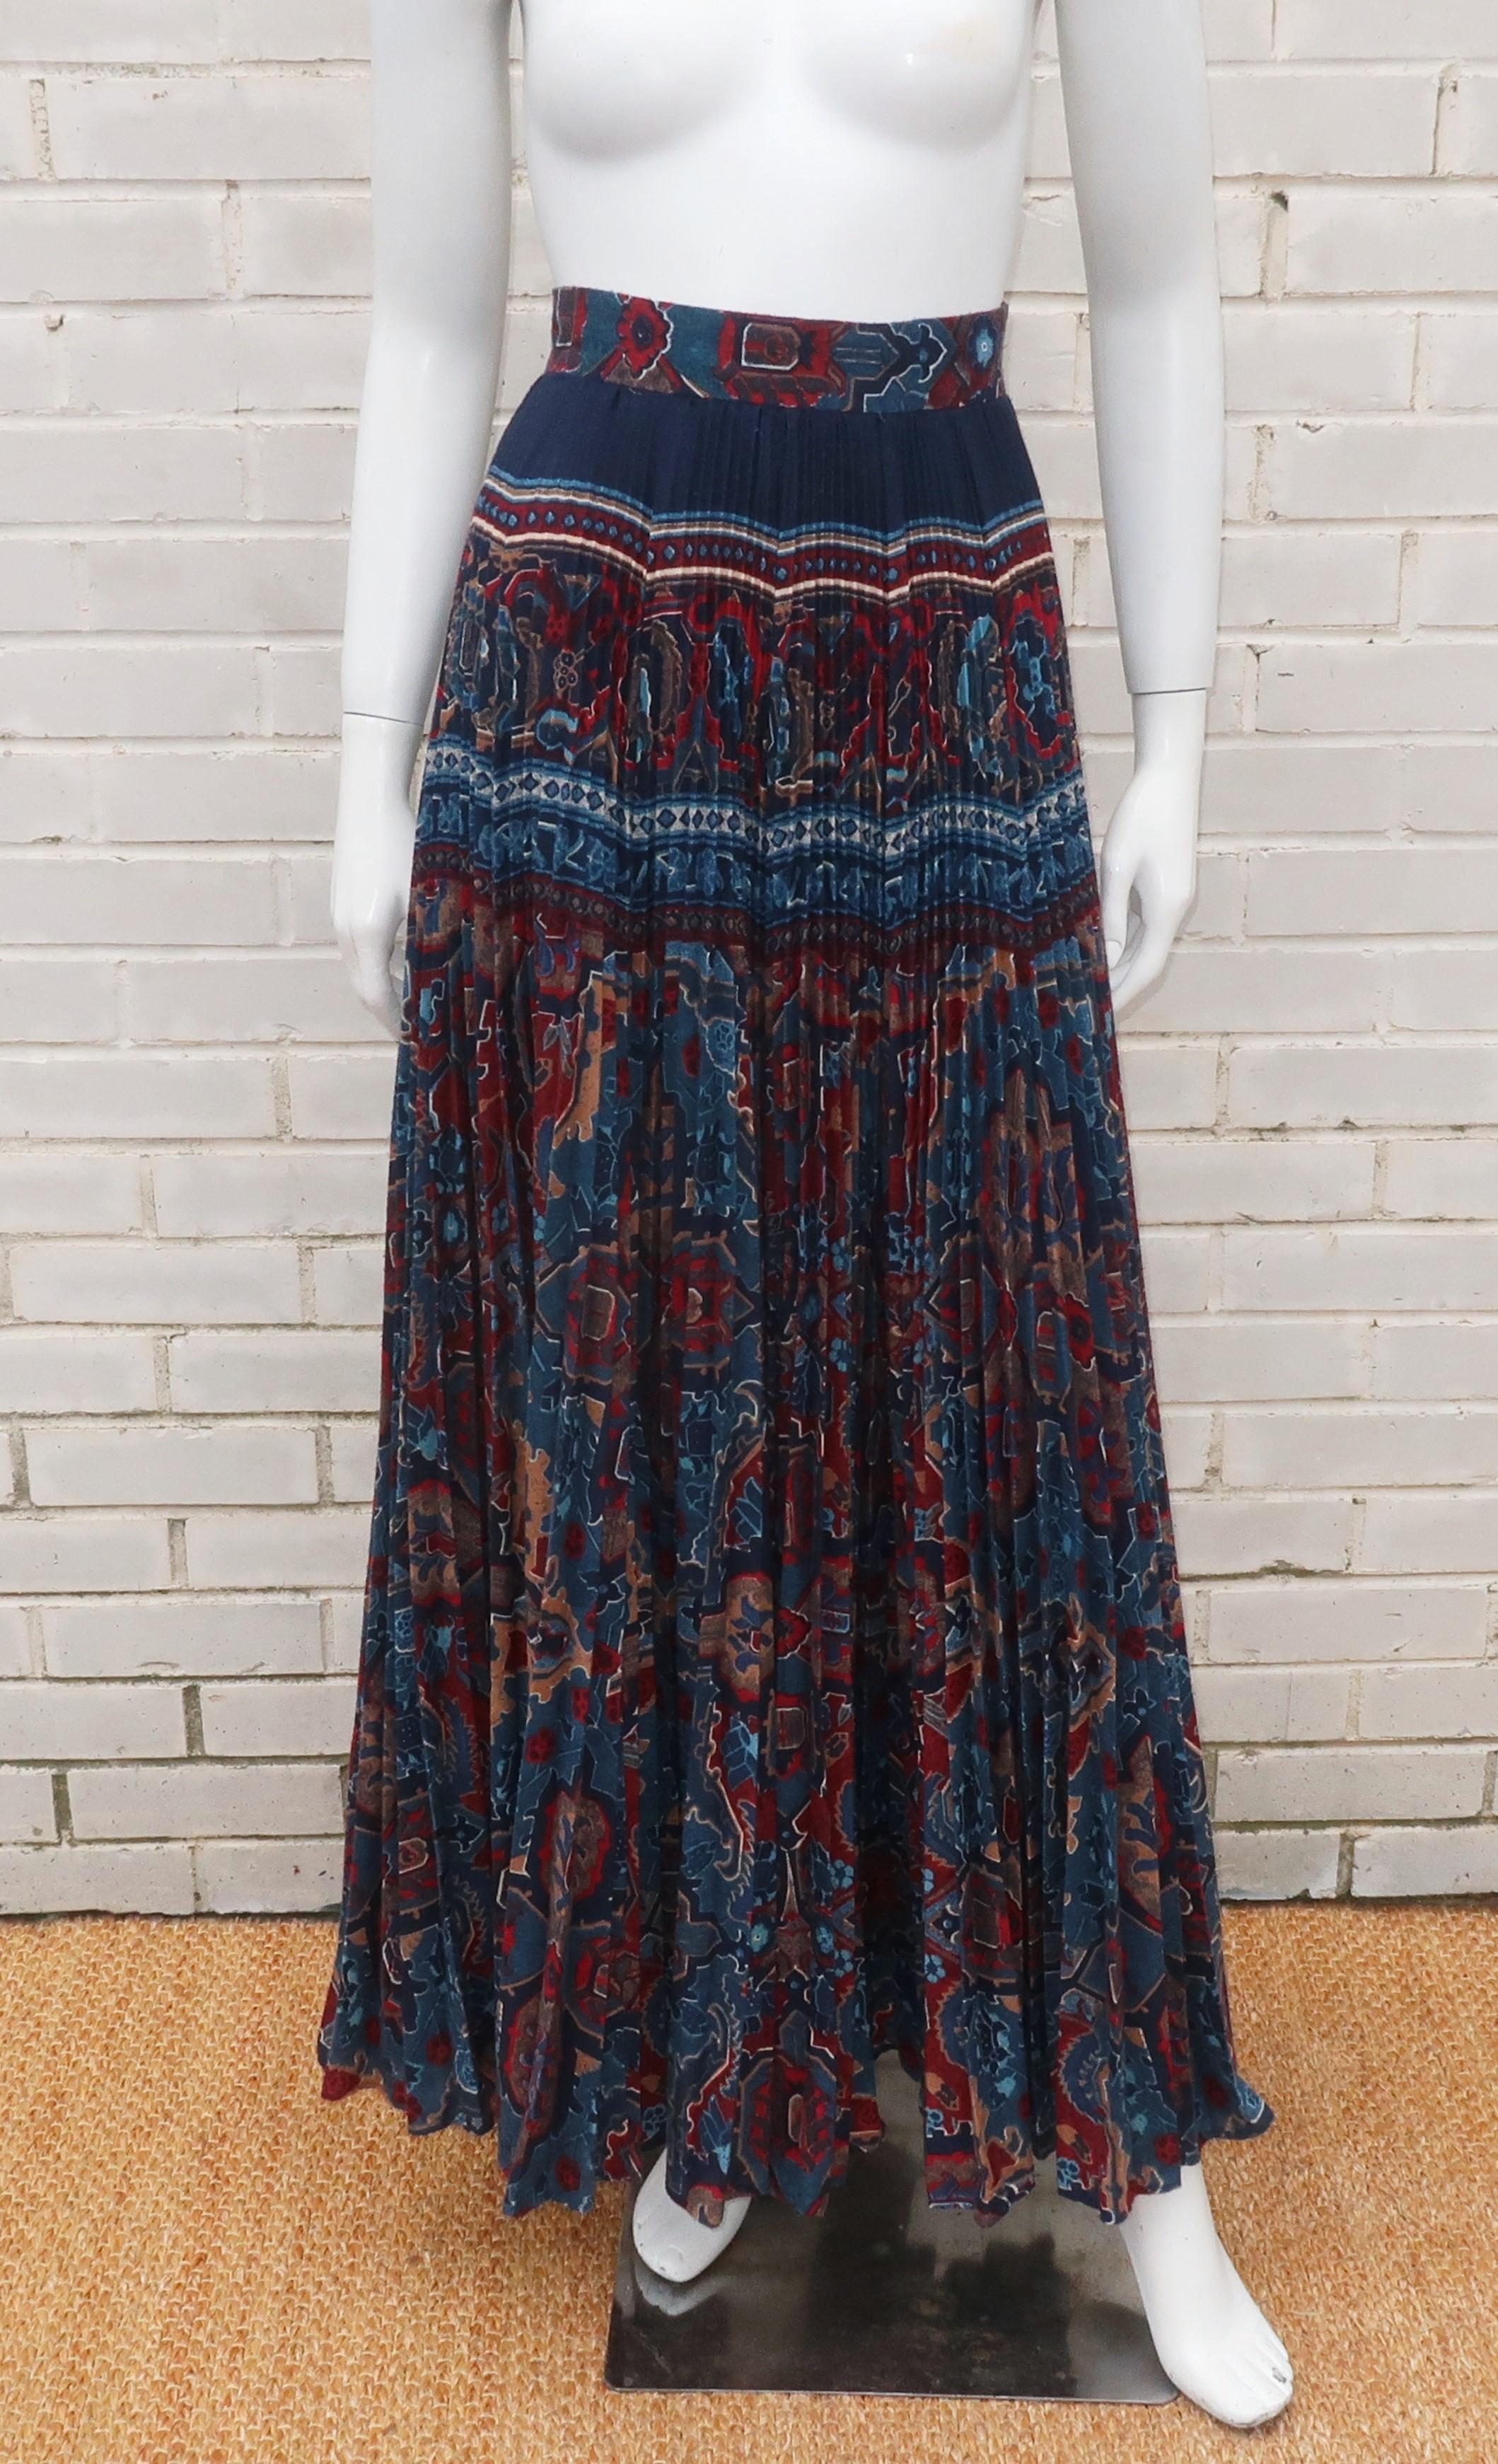 Get a little 1970's California cool with this maxi micro pleated skirt by Elissa in a bohemian print accented by shades of dark blue, ocean blue, tan and brick red.  The panels of fabric are cleverly cut to create a pattern near the waistband that